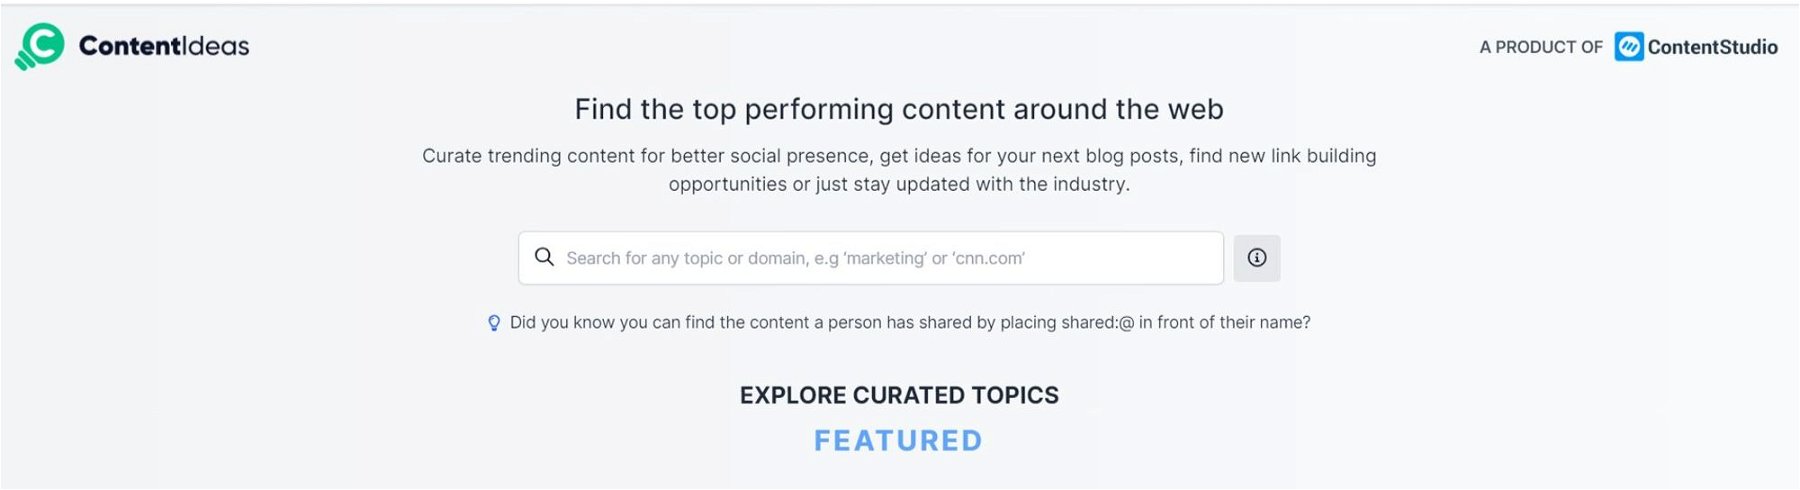 Content Ideas displaying its search bar on the homepage.